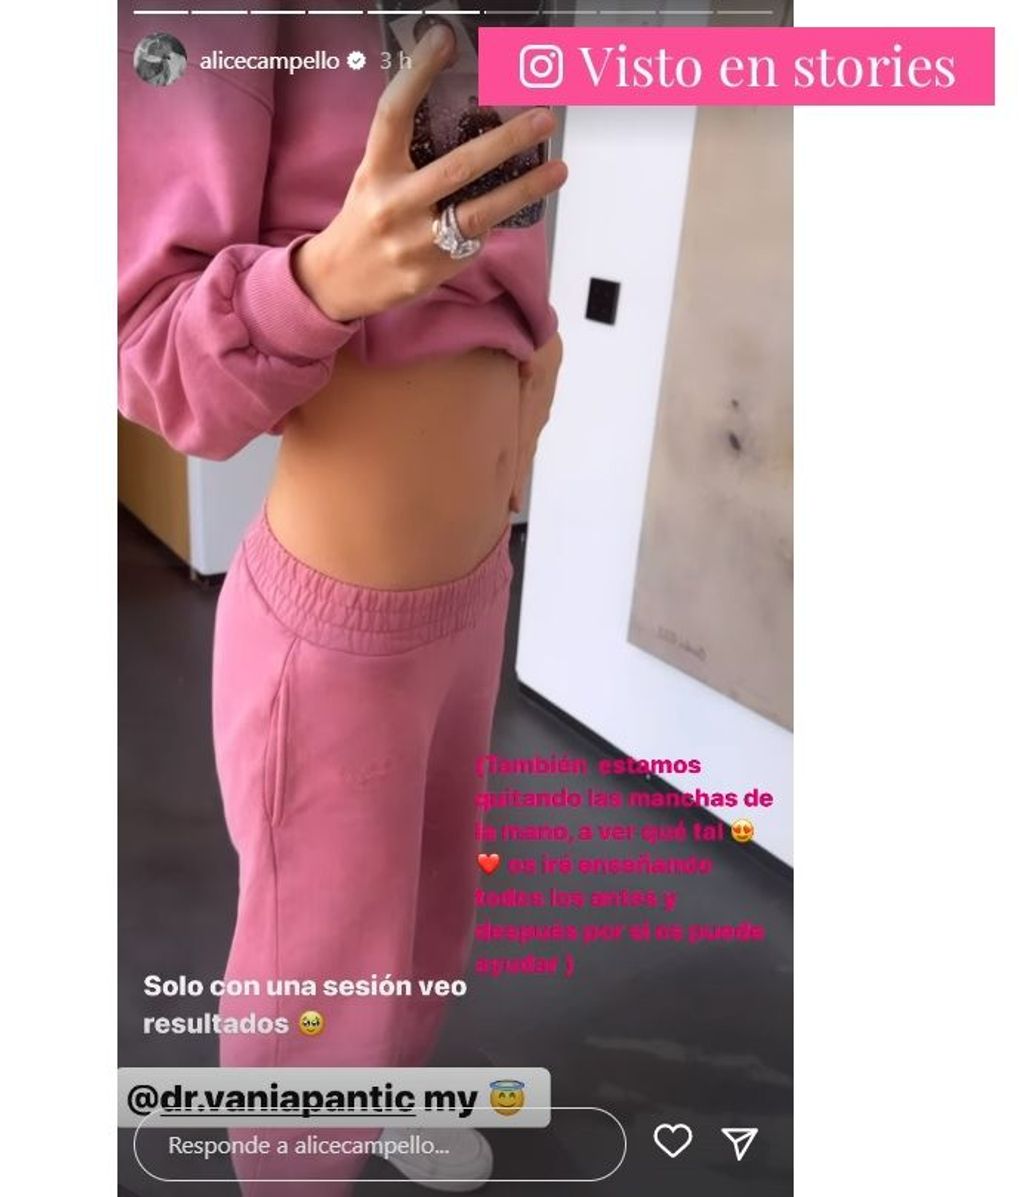 Alice Campello shares the image of her postpartum belly in full physical recovery